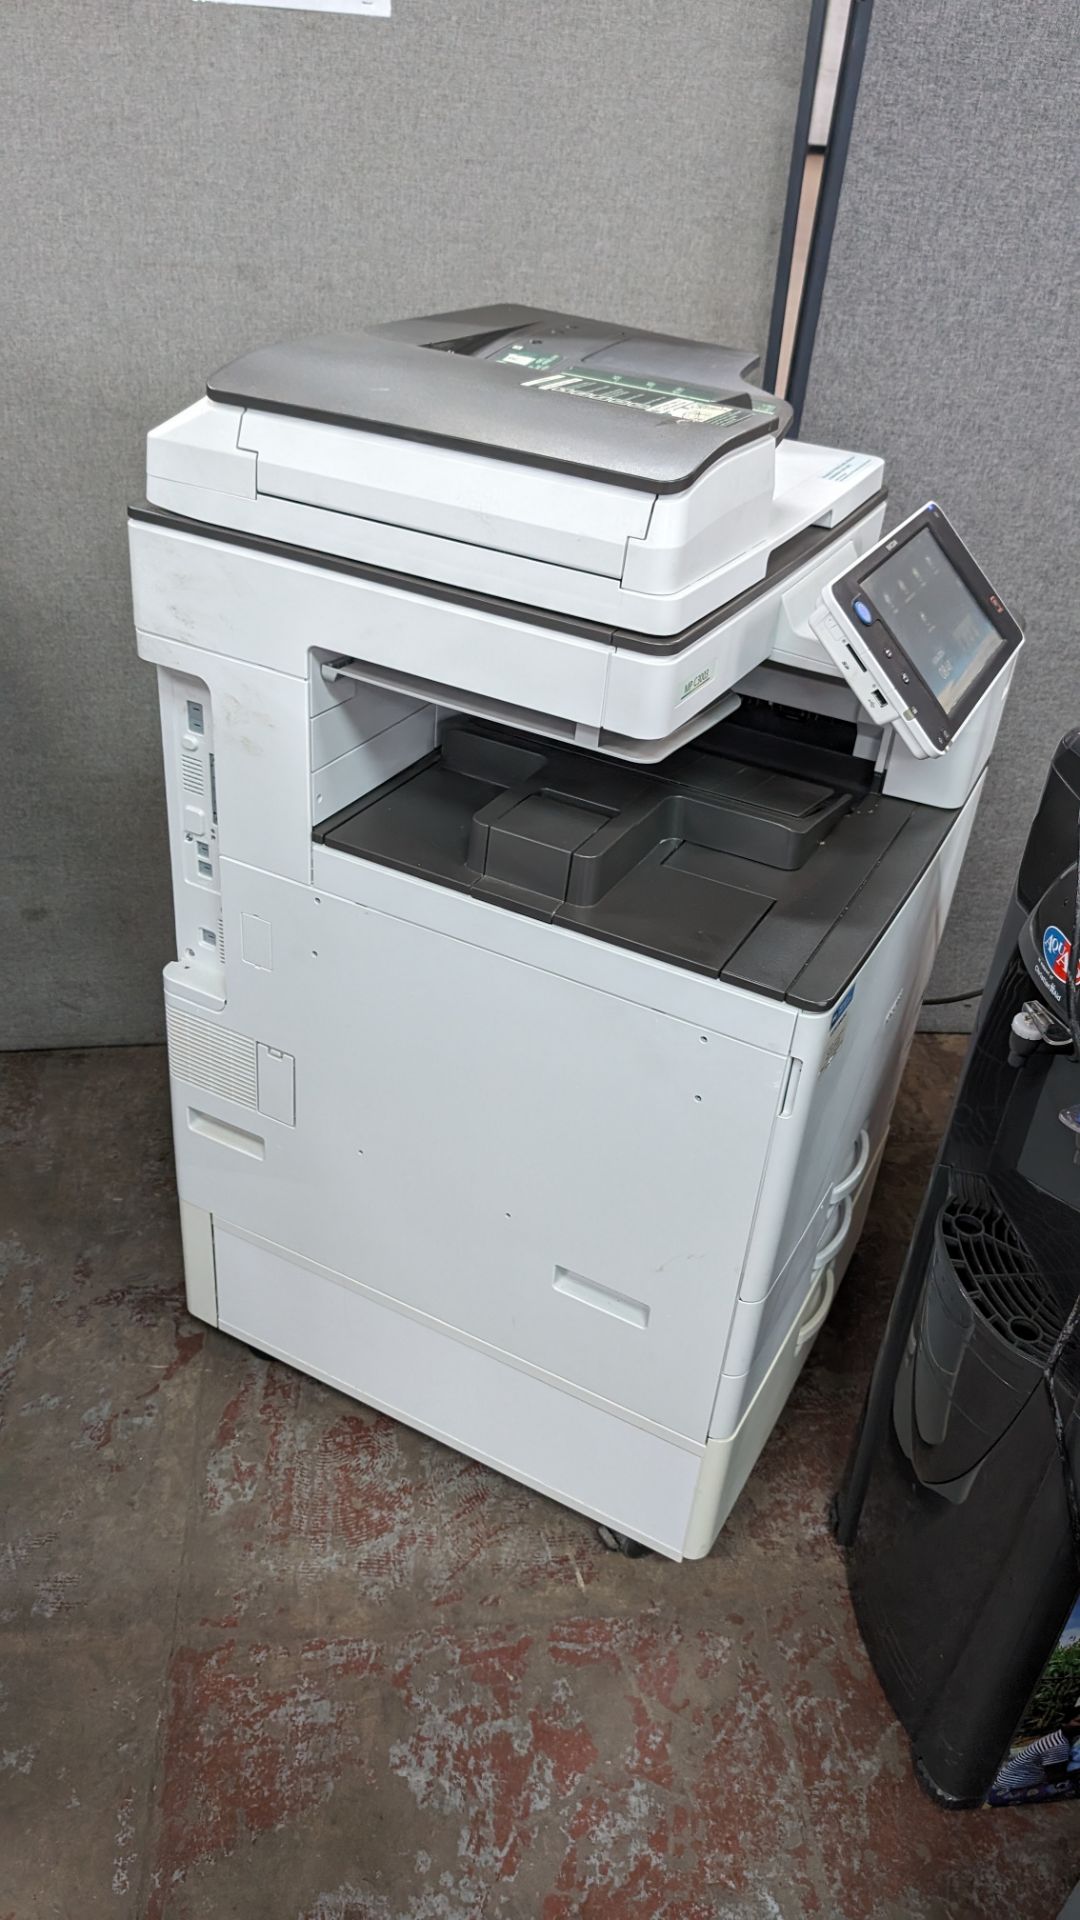 Ricoh MP C3003 floor standing copier with touchscreen controls, ADF, twin paper cassettes & more - Image 15 of 18